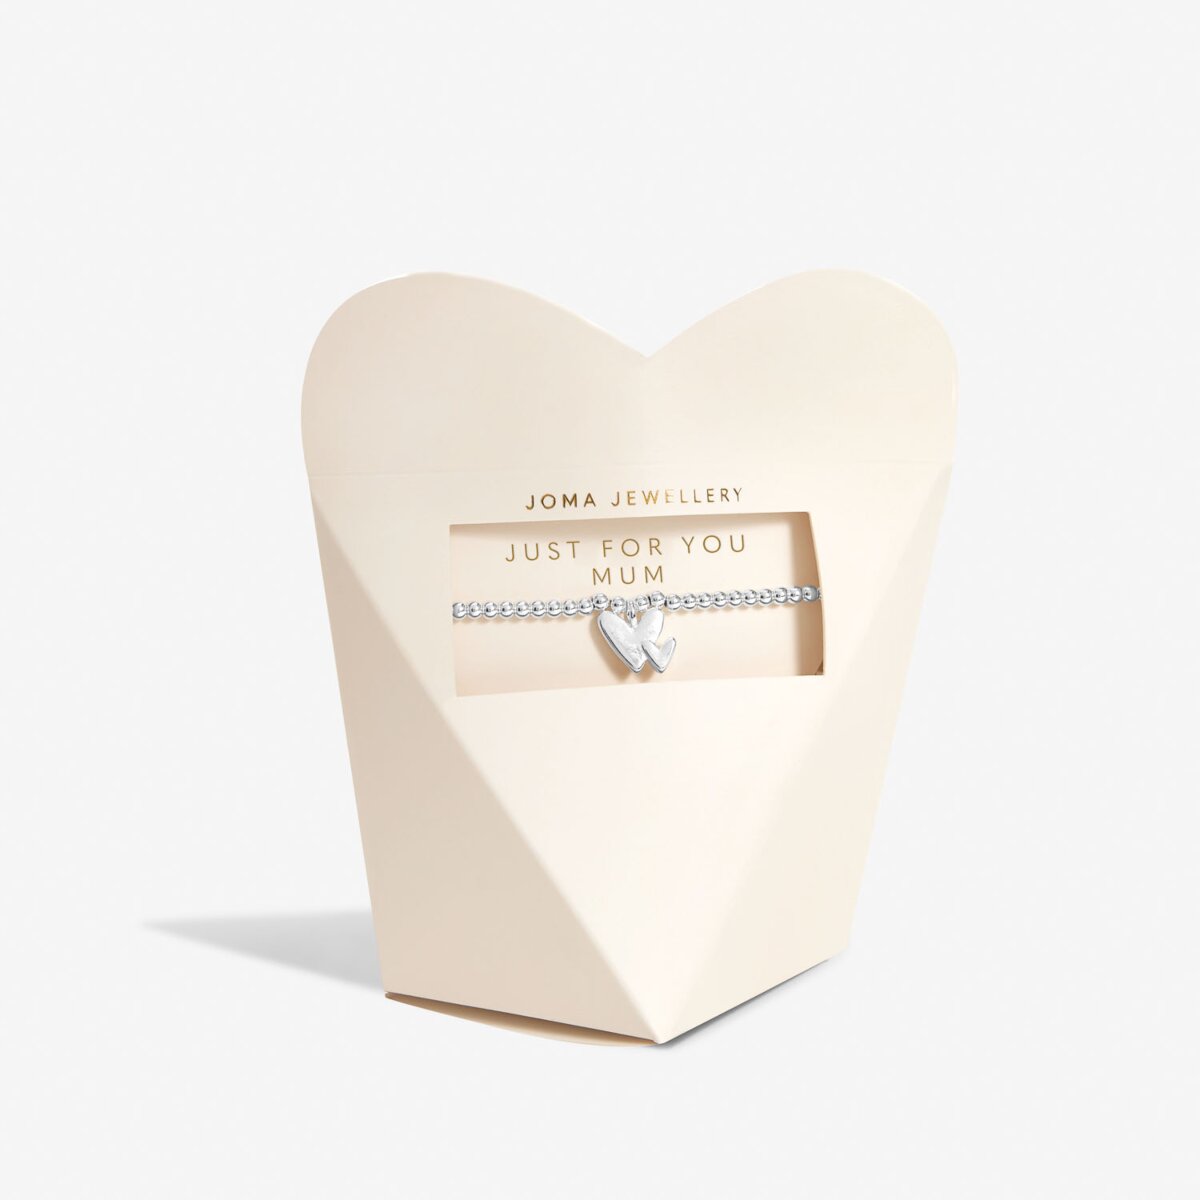 JOMA JEWELLERY | MOTHER'S DAY FROM THE HEART GIFT BOX | JUST FOR YOU MUM BRACELET